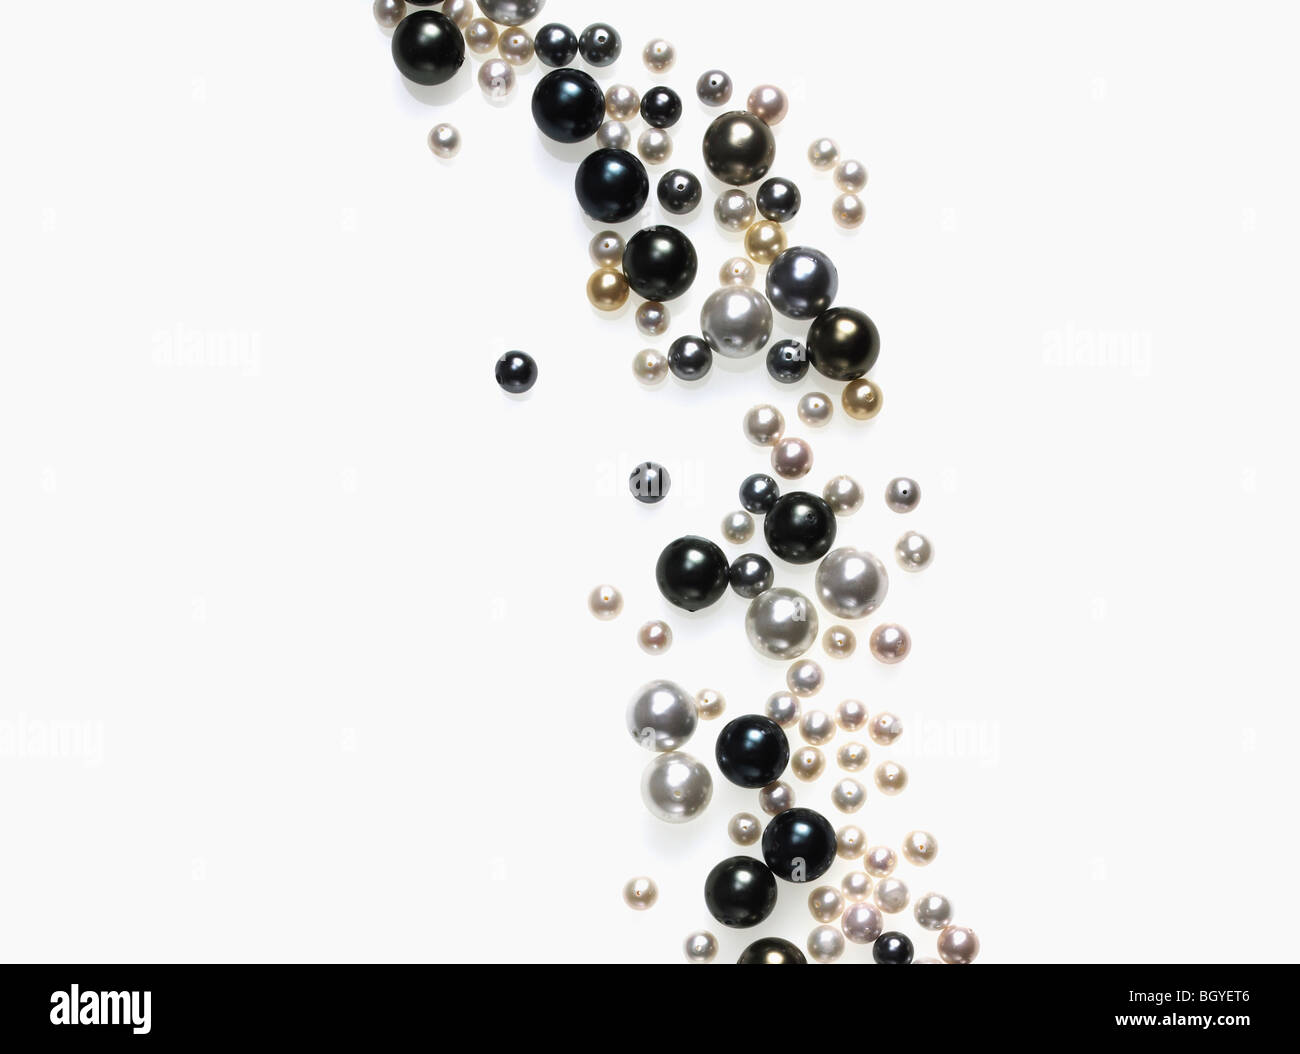 Pearls Cut Out Stock Images & Pictures - Alamy